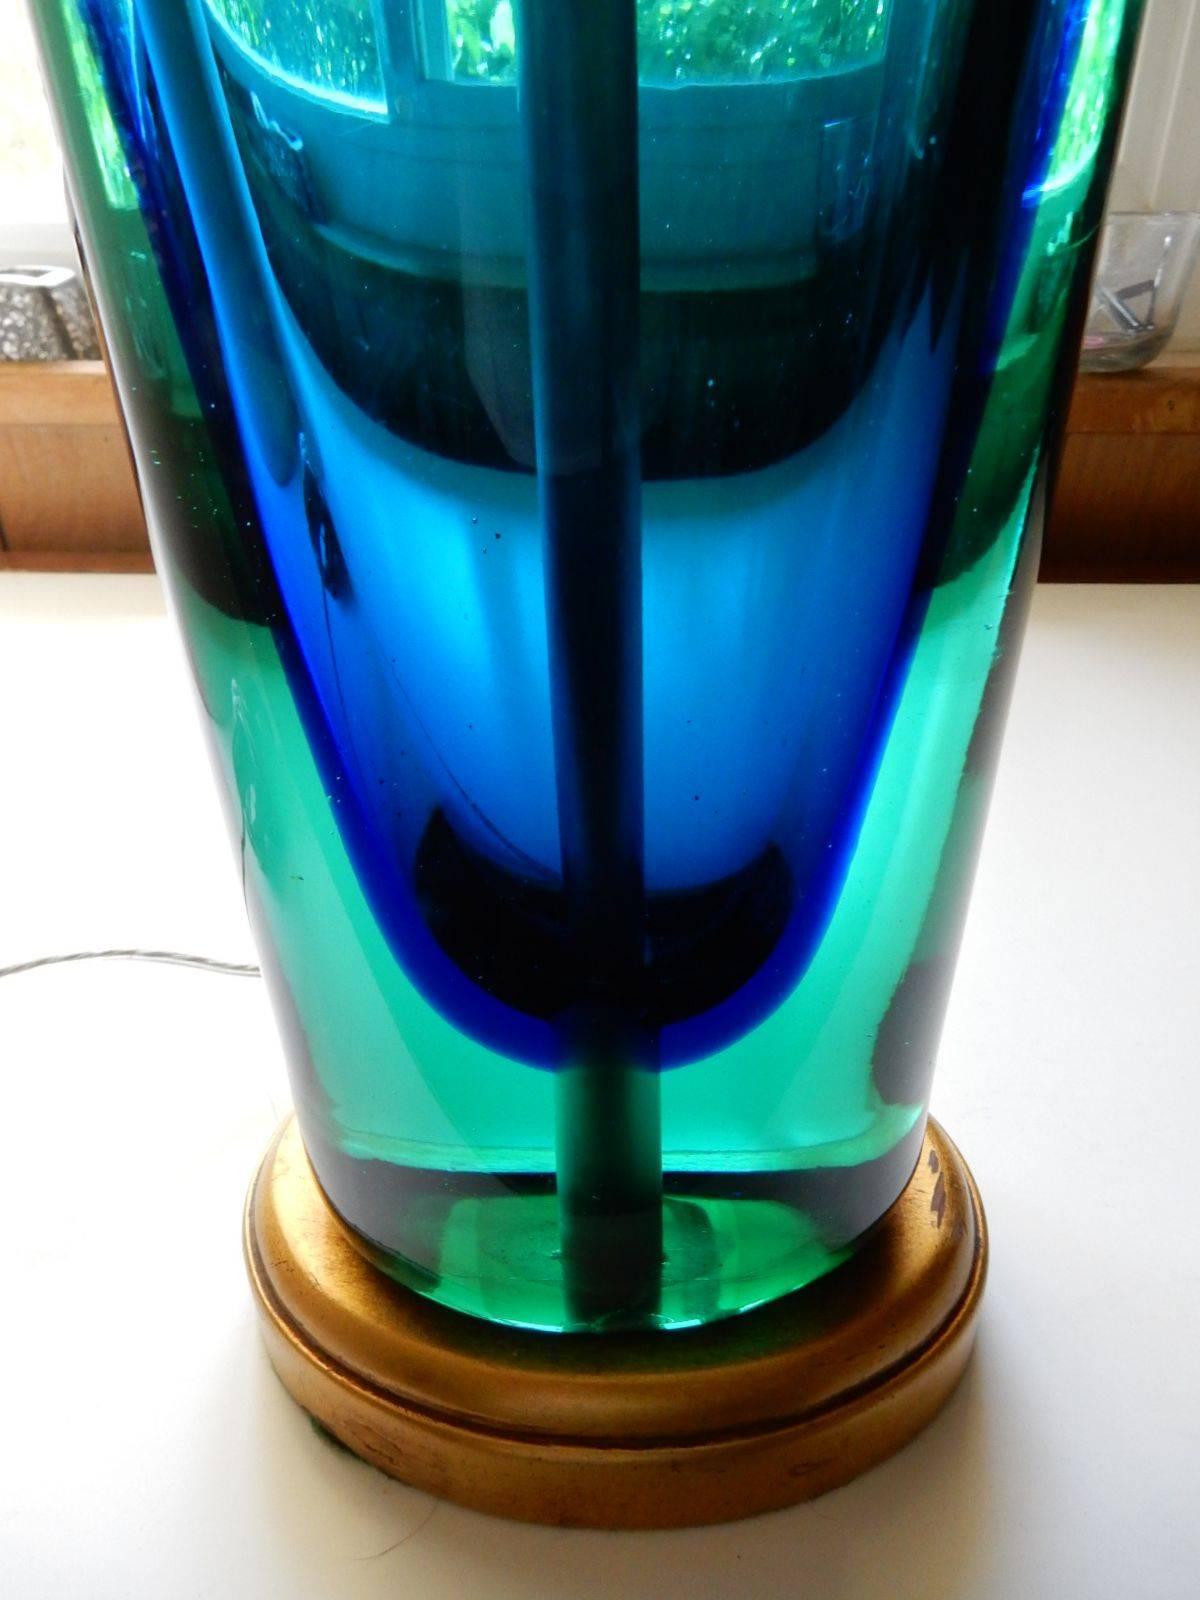 Gorgeous teal blue and aqua Sommerso art glass lamp by Flavio Poli, circa 1950.
Glass vase/body stands 20